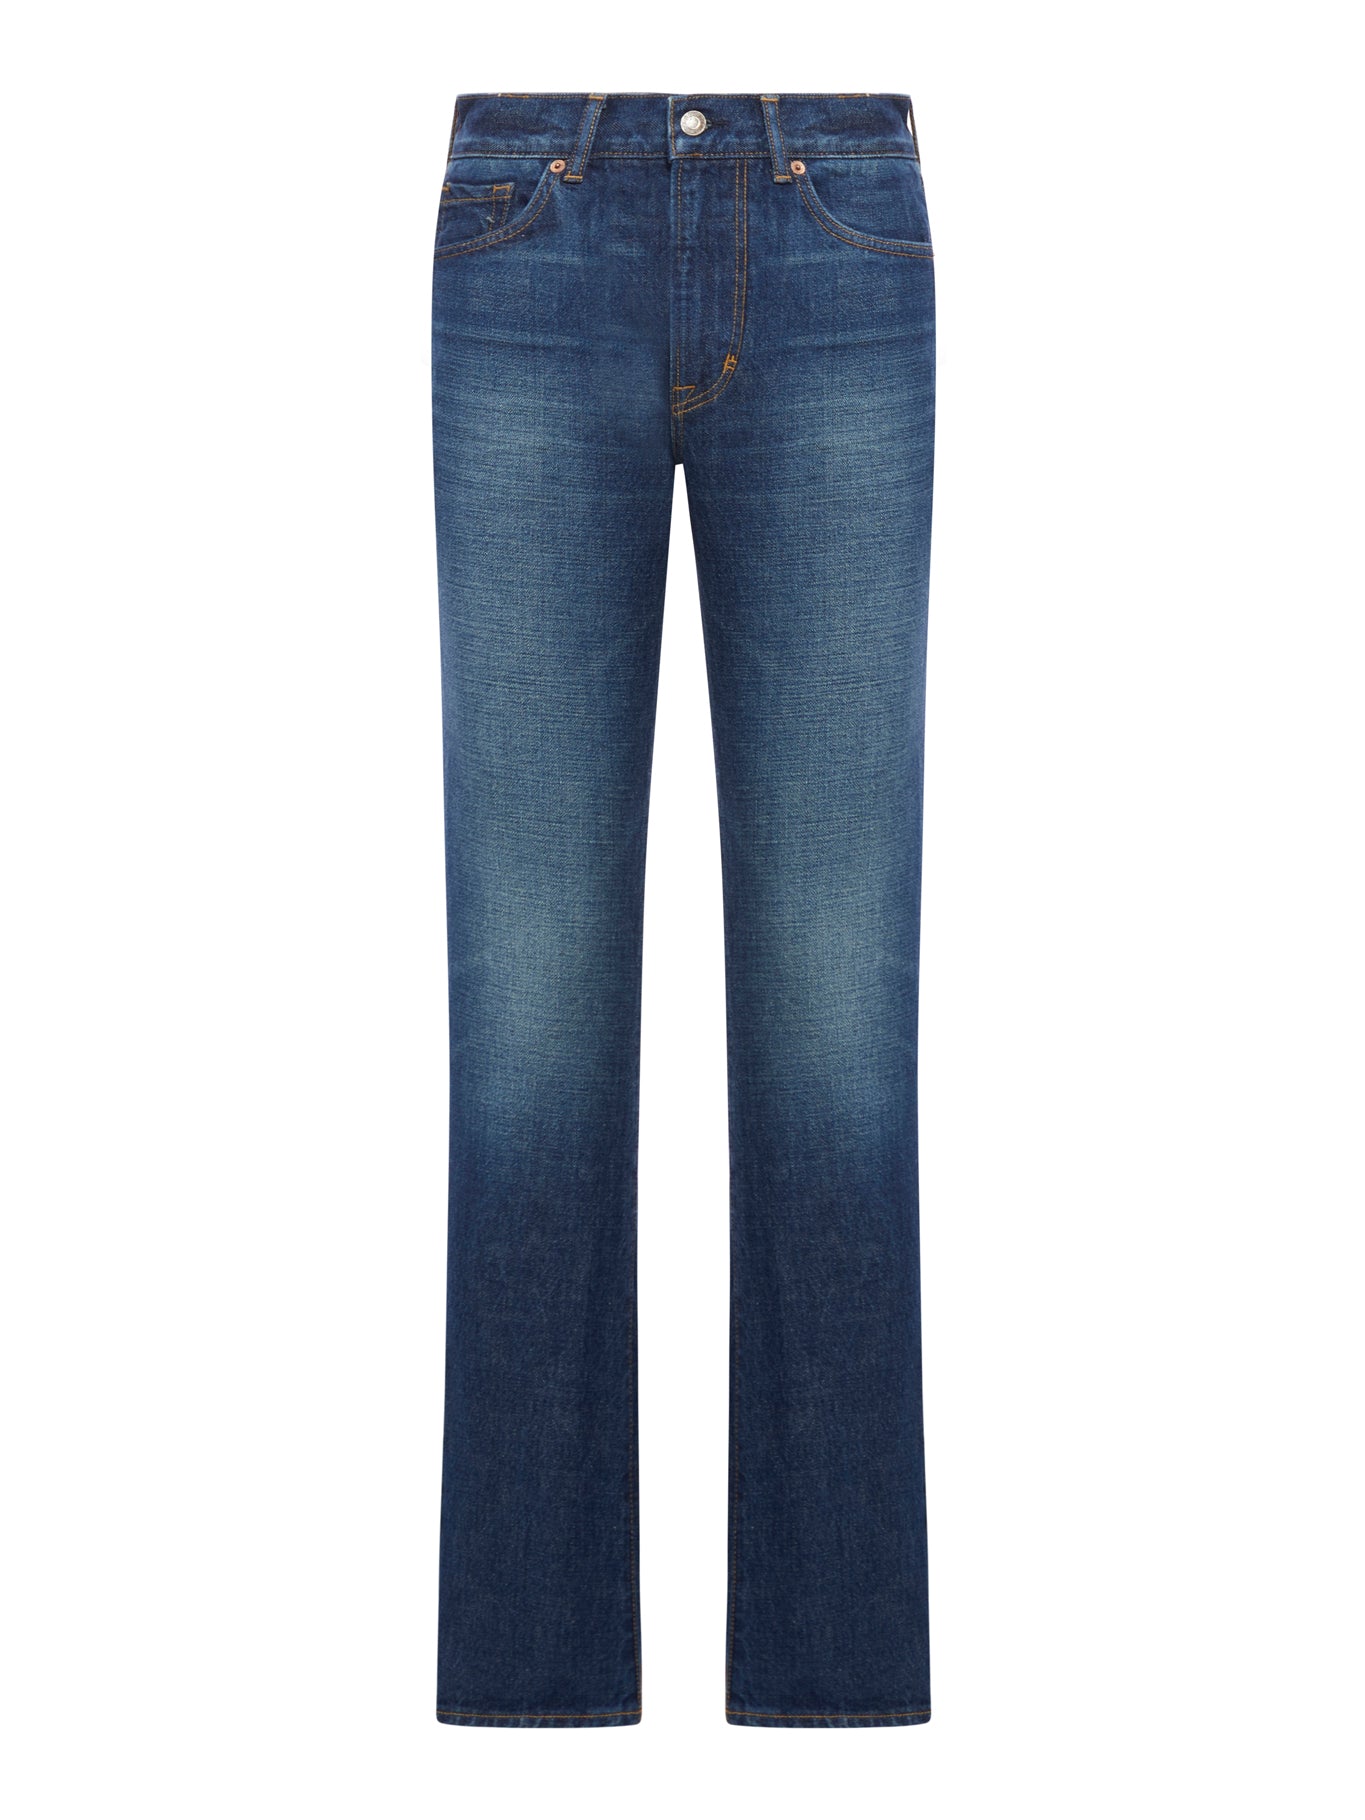 JEANS DRITTI IN DENIM STONE WASHED